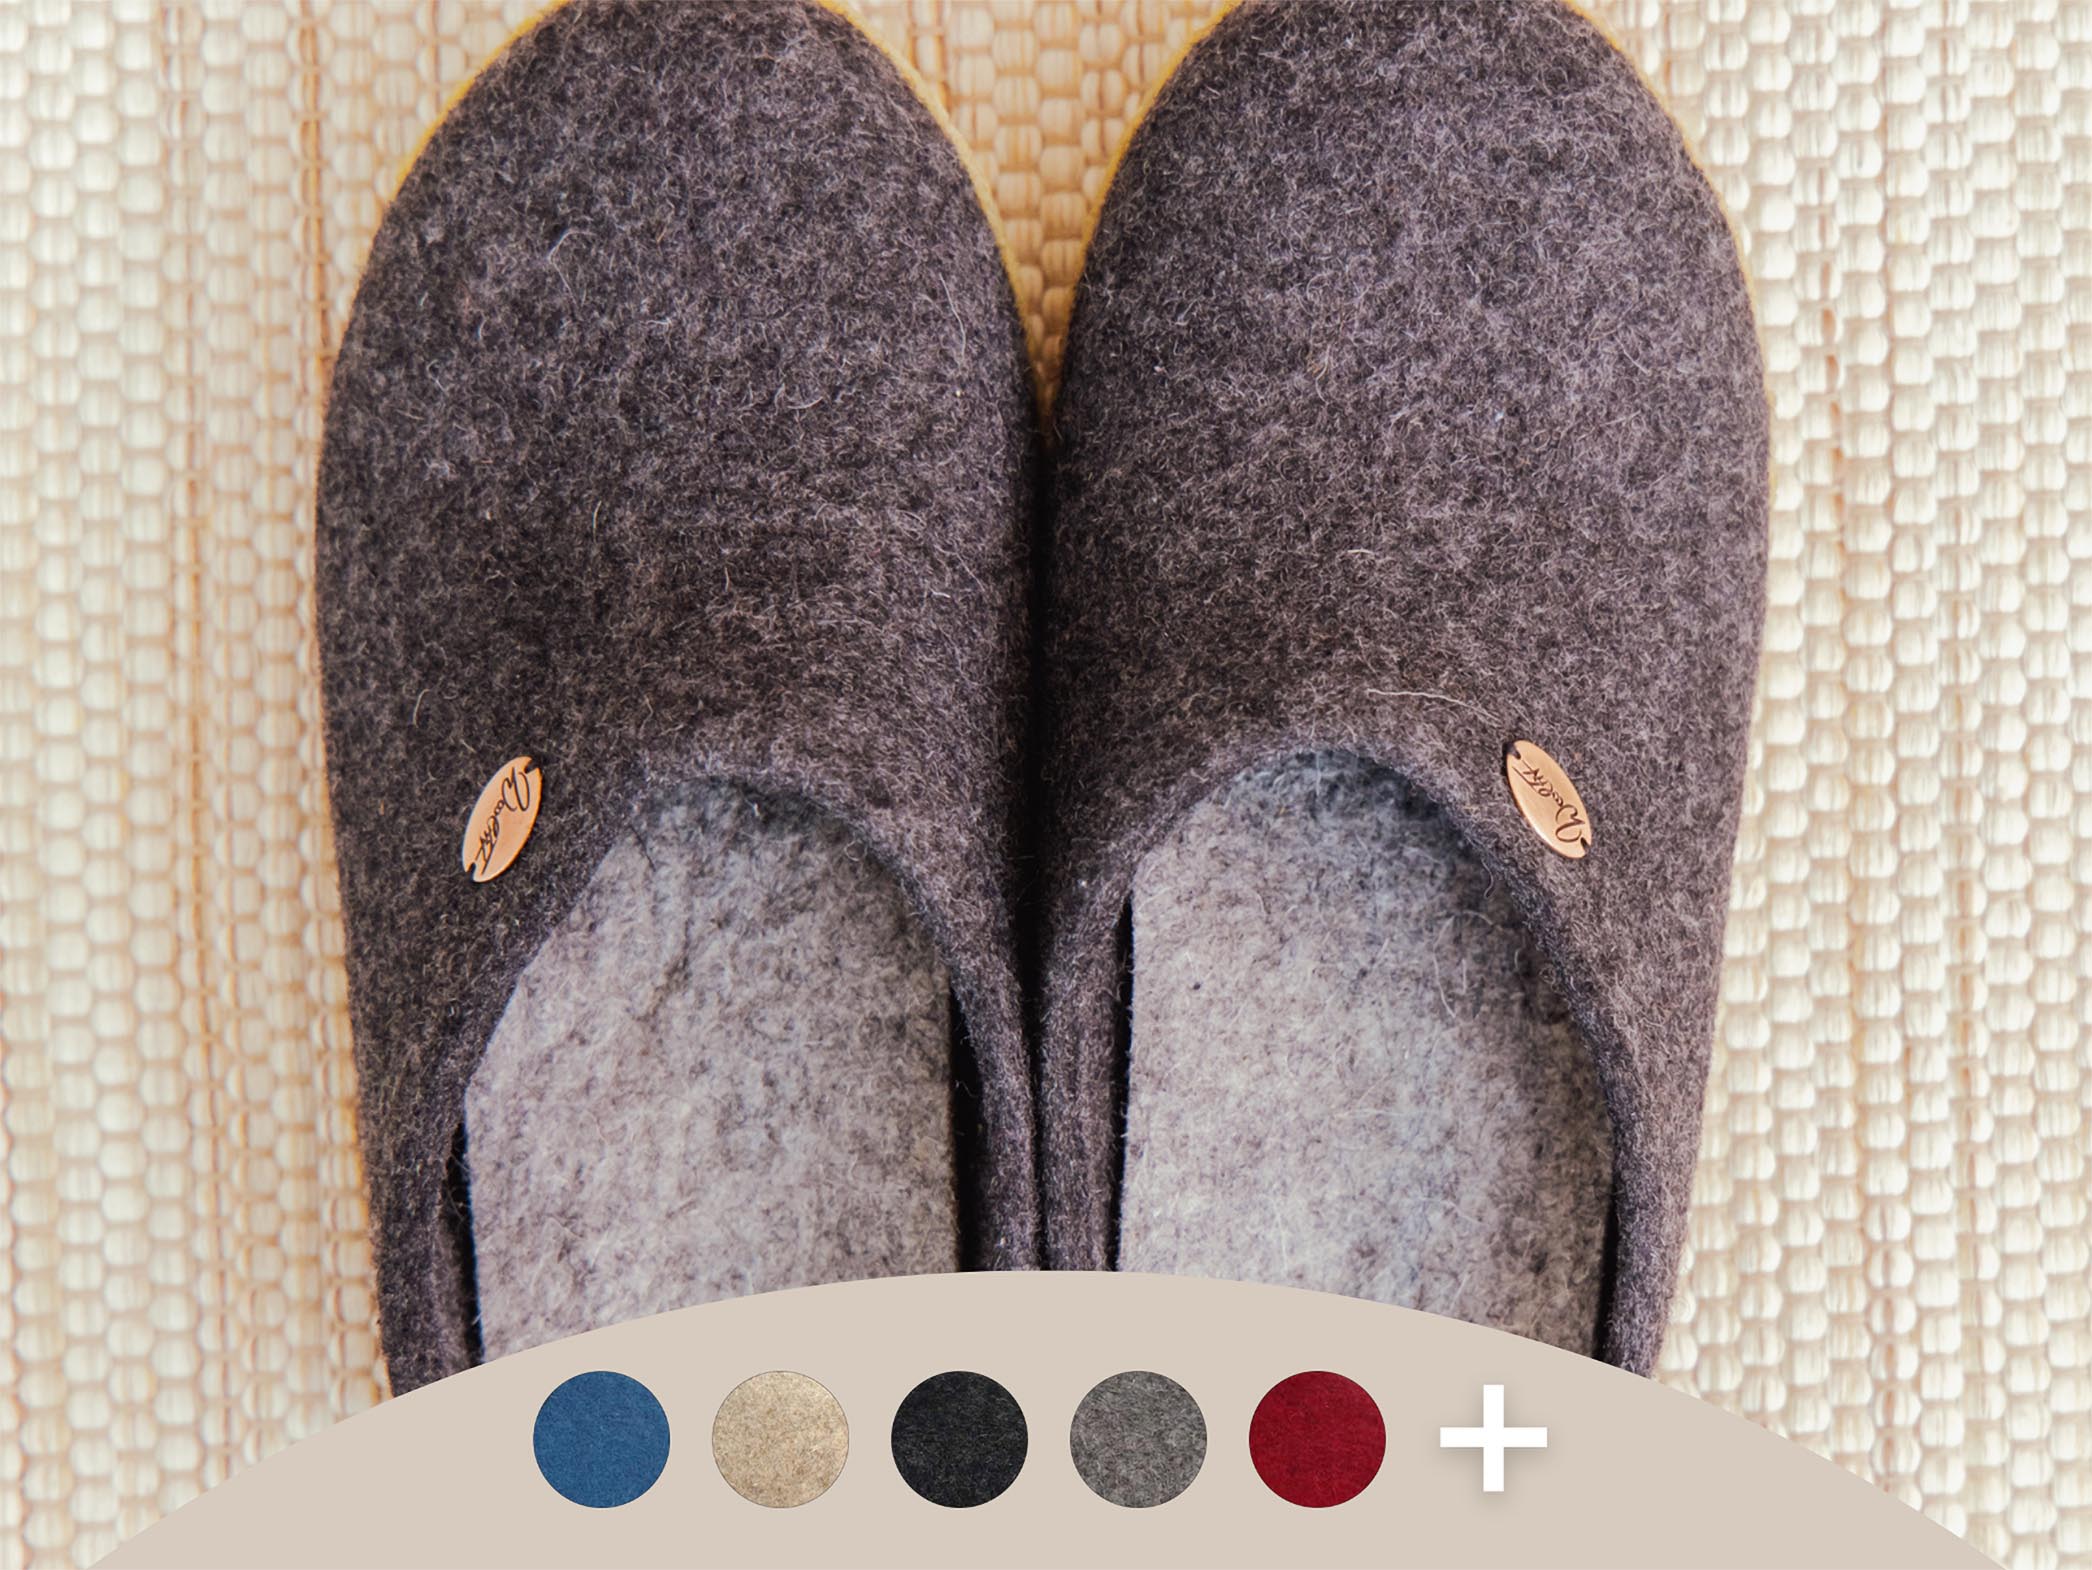 WoolFit Classic | Felt Slippers with Insoles & Rubber Sole